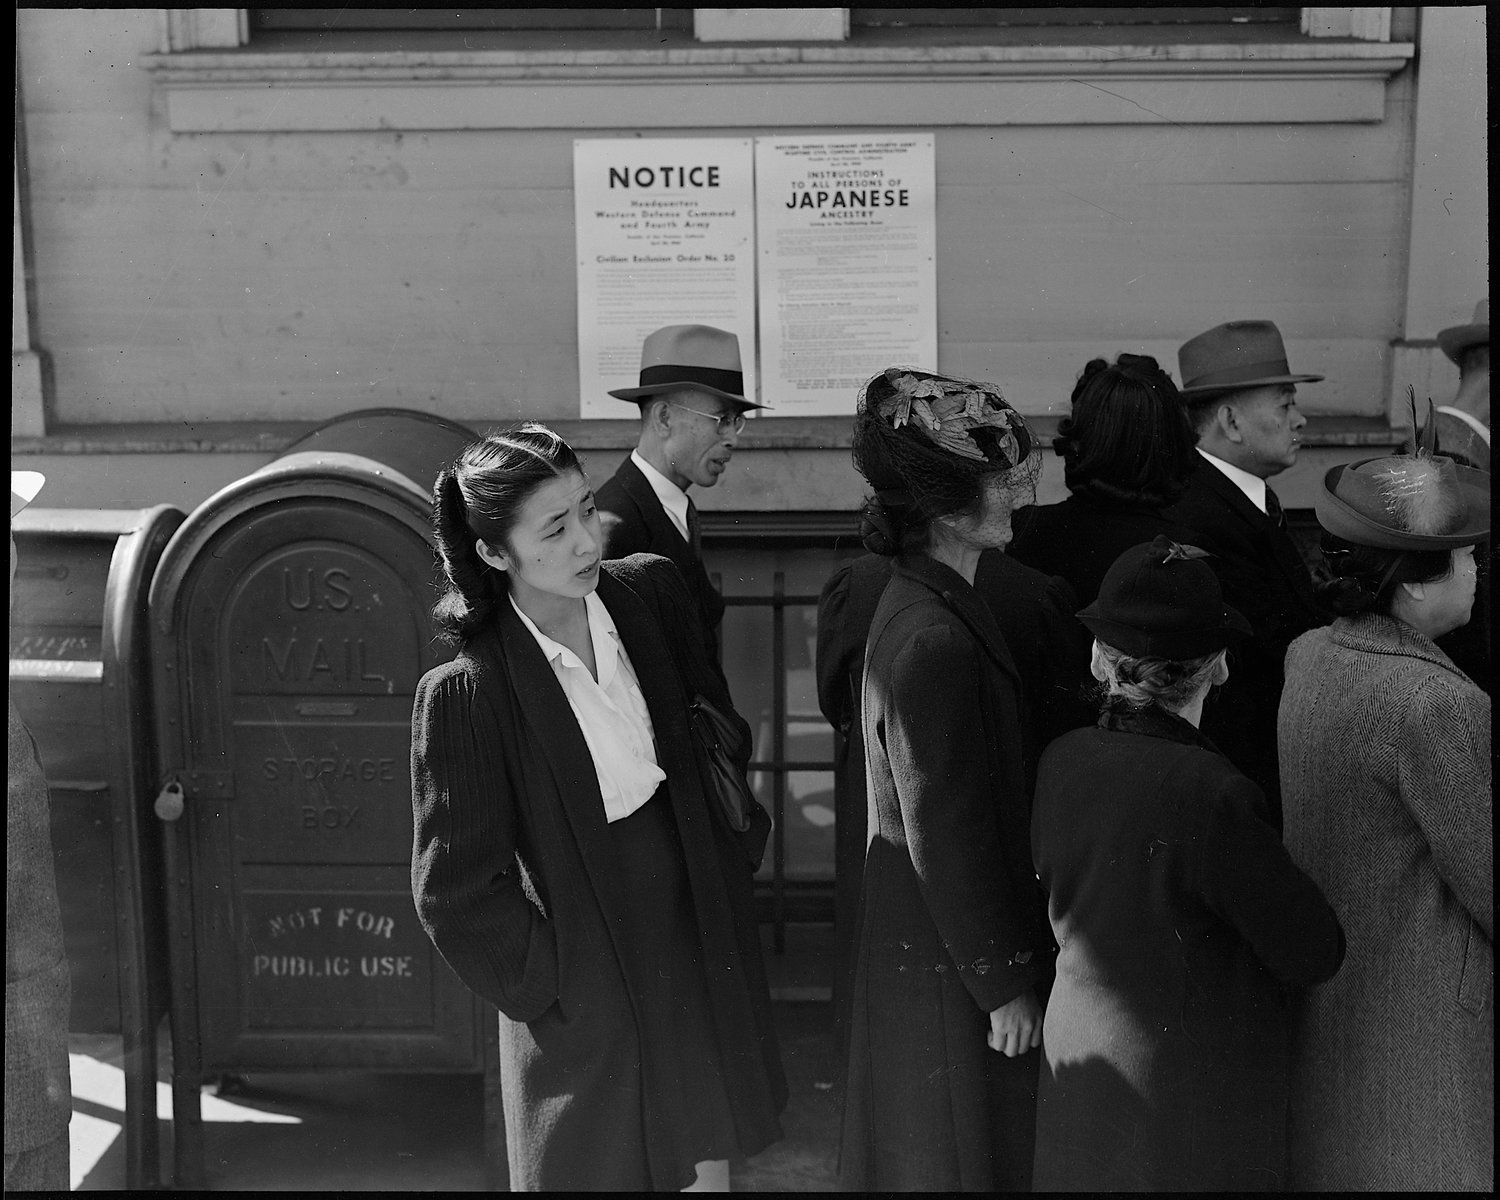 San Francisco, California. Residents of Japanese ancestry appear for registration prior to evacuation. Evacuees will be housed in War Relocation Authority centers for the duration.